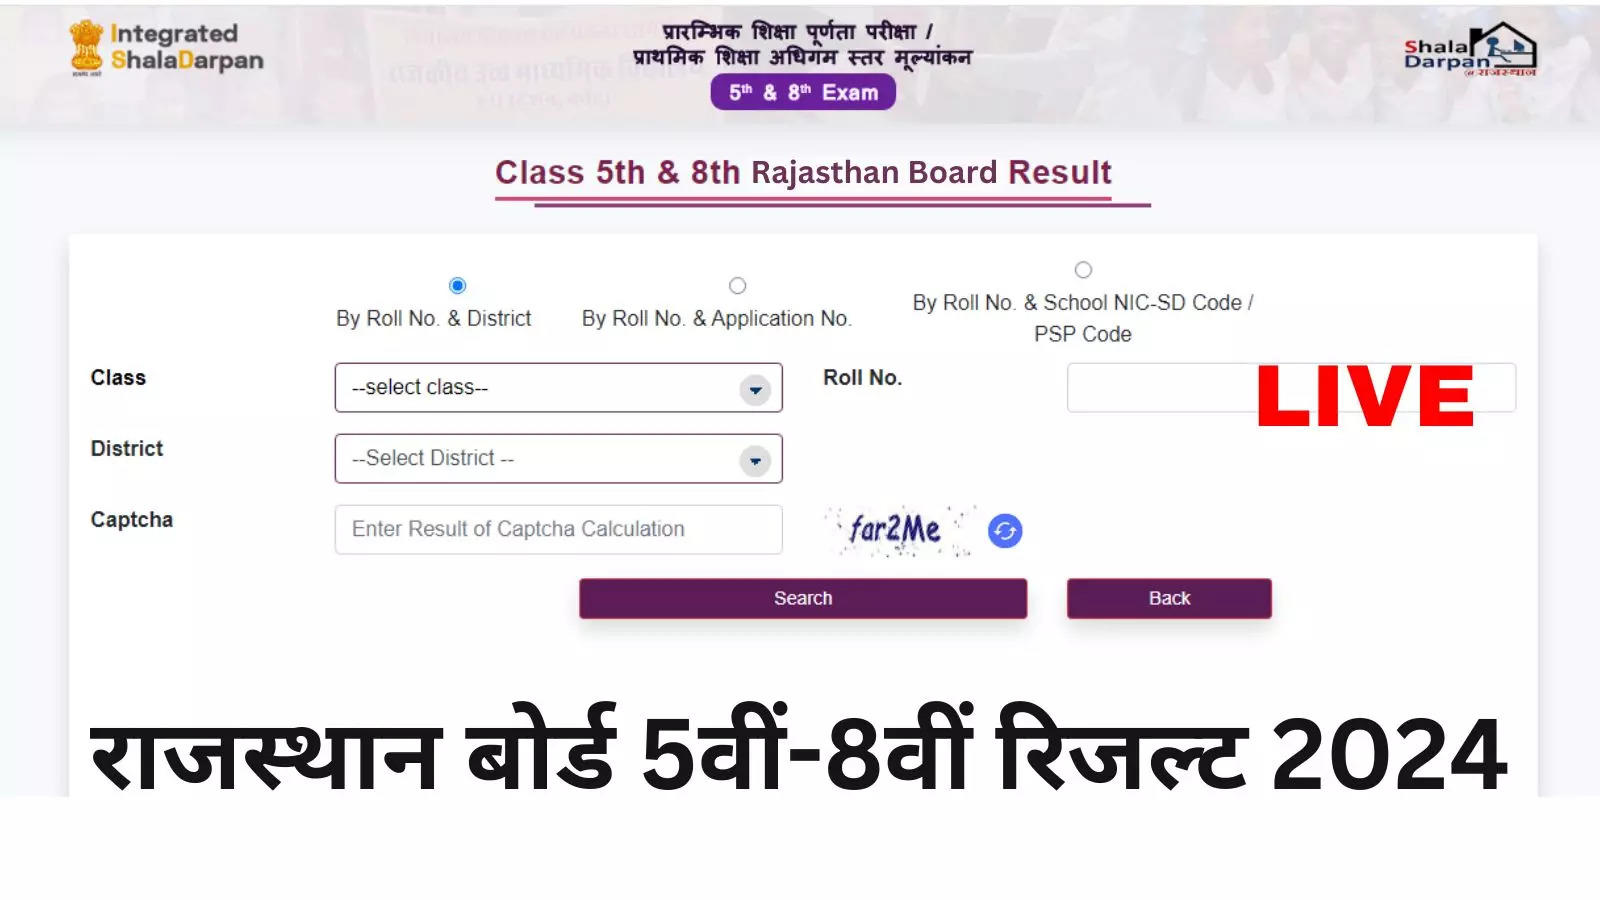 RBSE Class 5th, 8th Result 2024 LIVE How To Check Rajasthan Board 5th